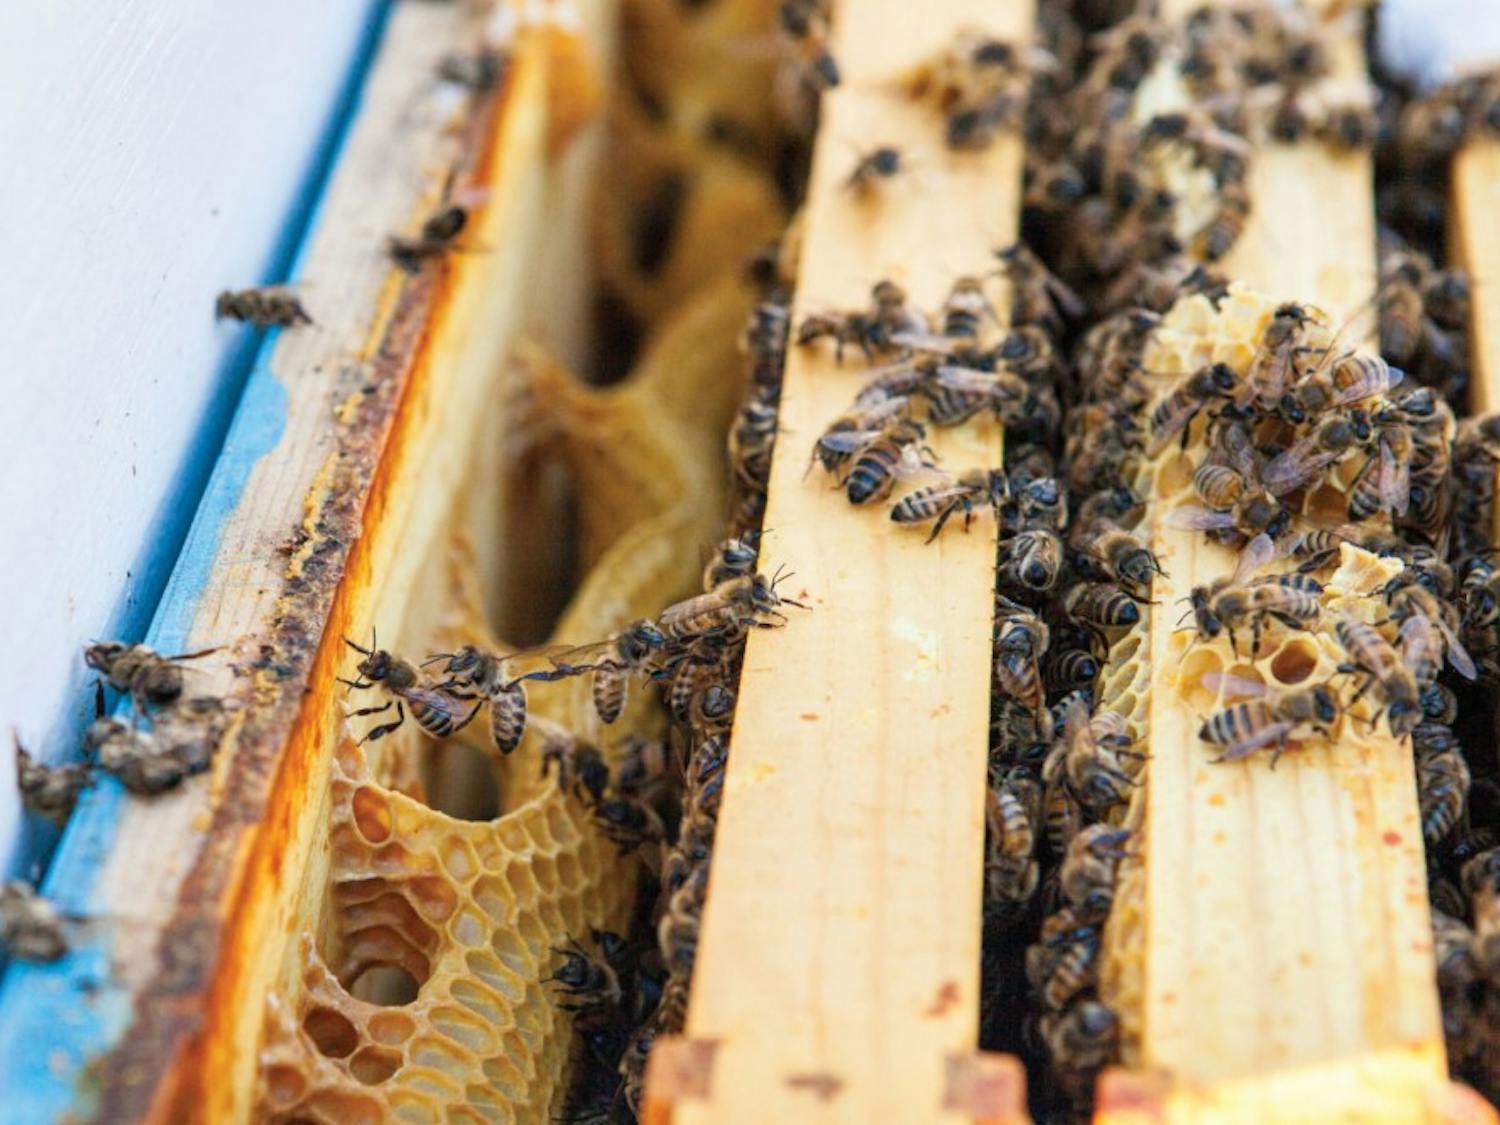 Honeybees buzz around a hive made by local beekeeper.  